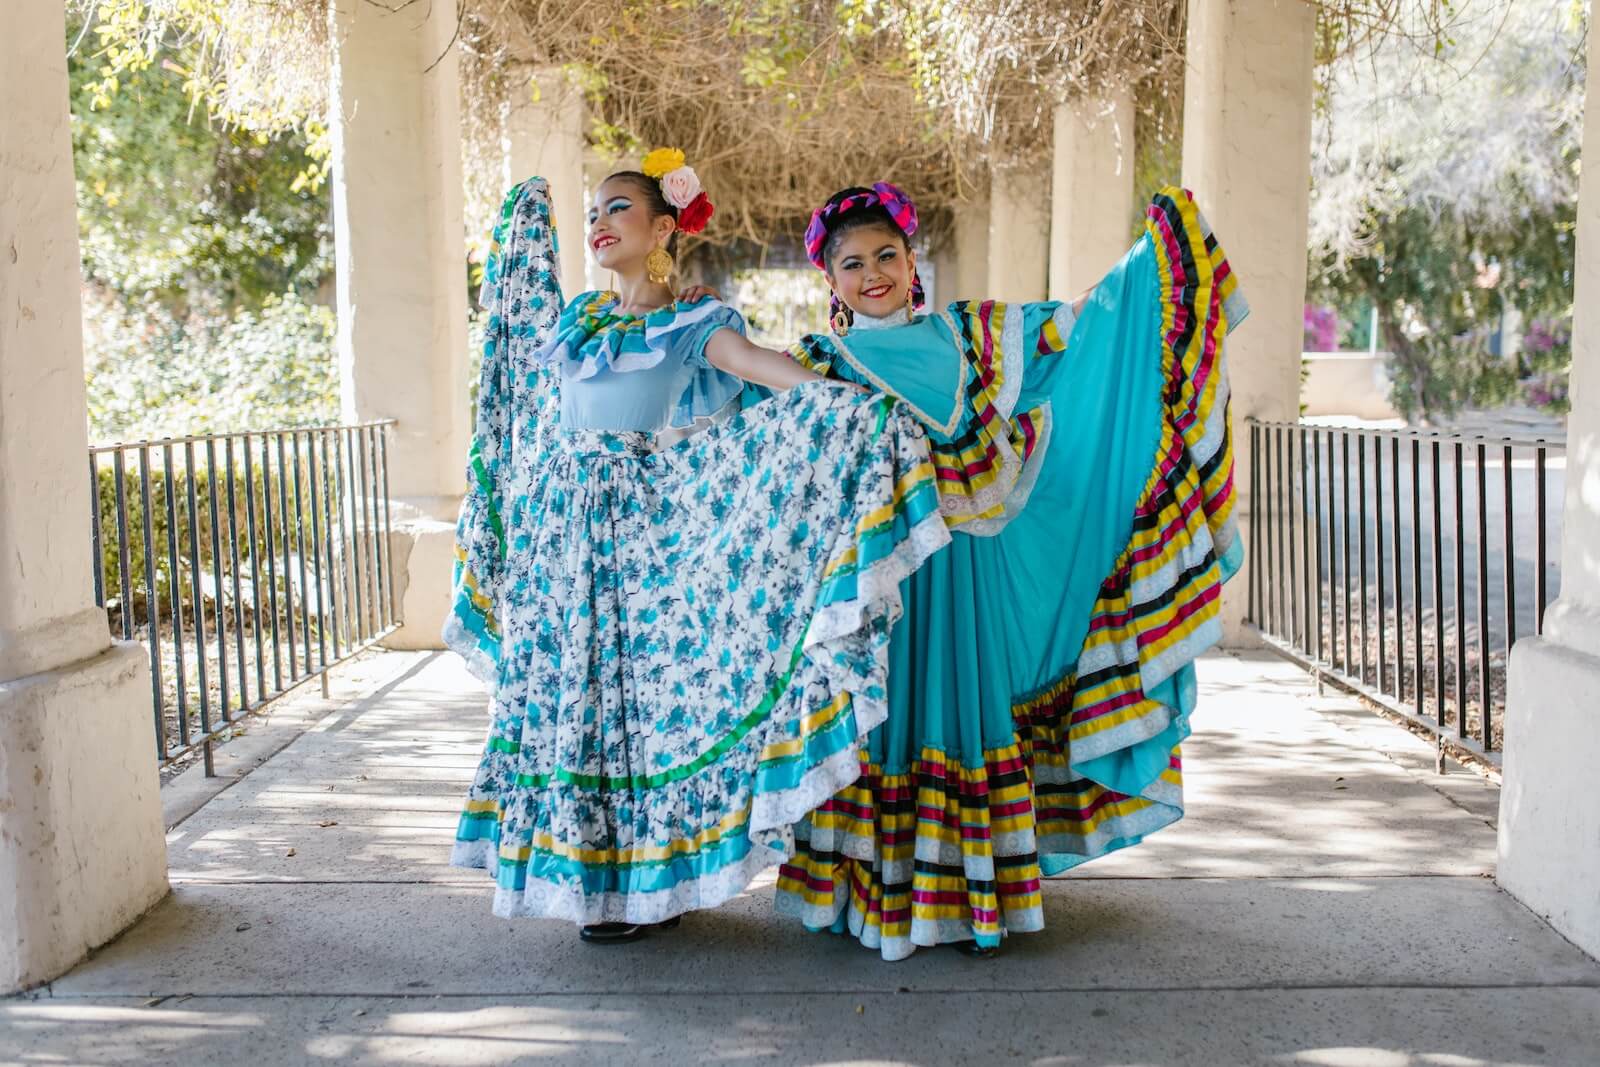 Two women dancing in their dresses for Cinco De Mayo in Mexico